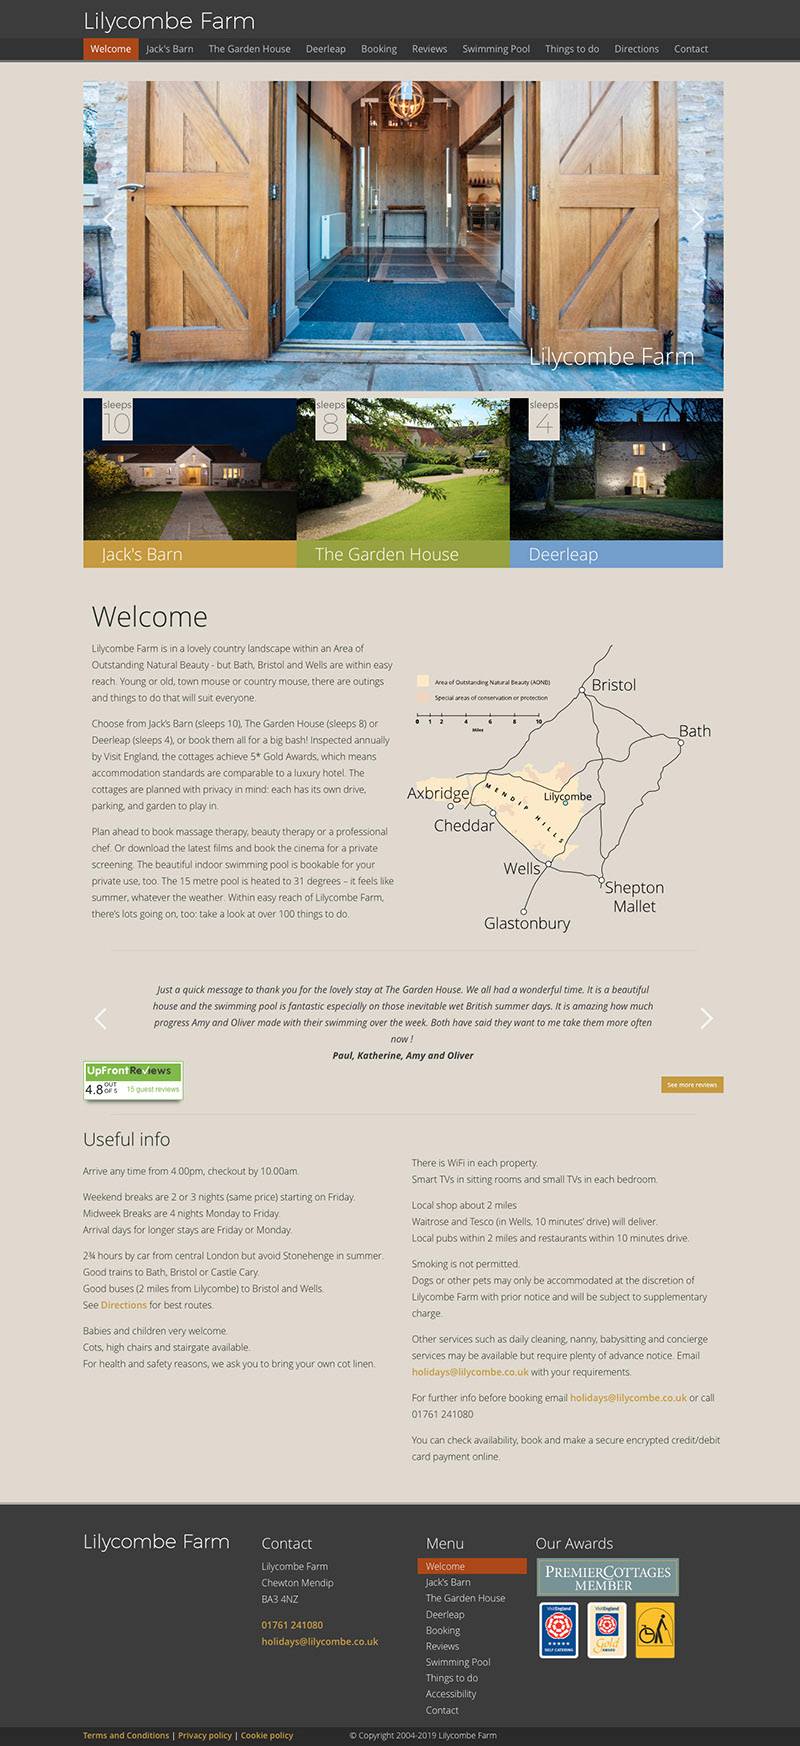 Lilycombe Farm homepage by Peter Poland